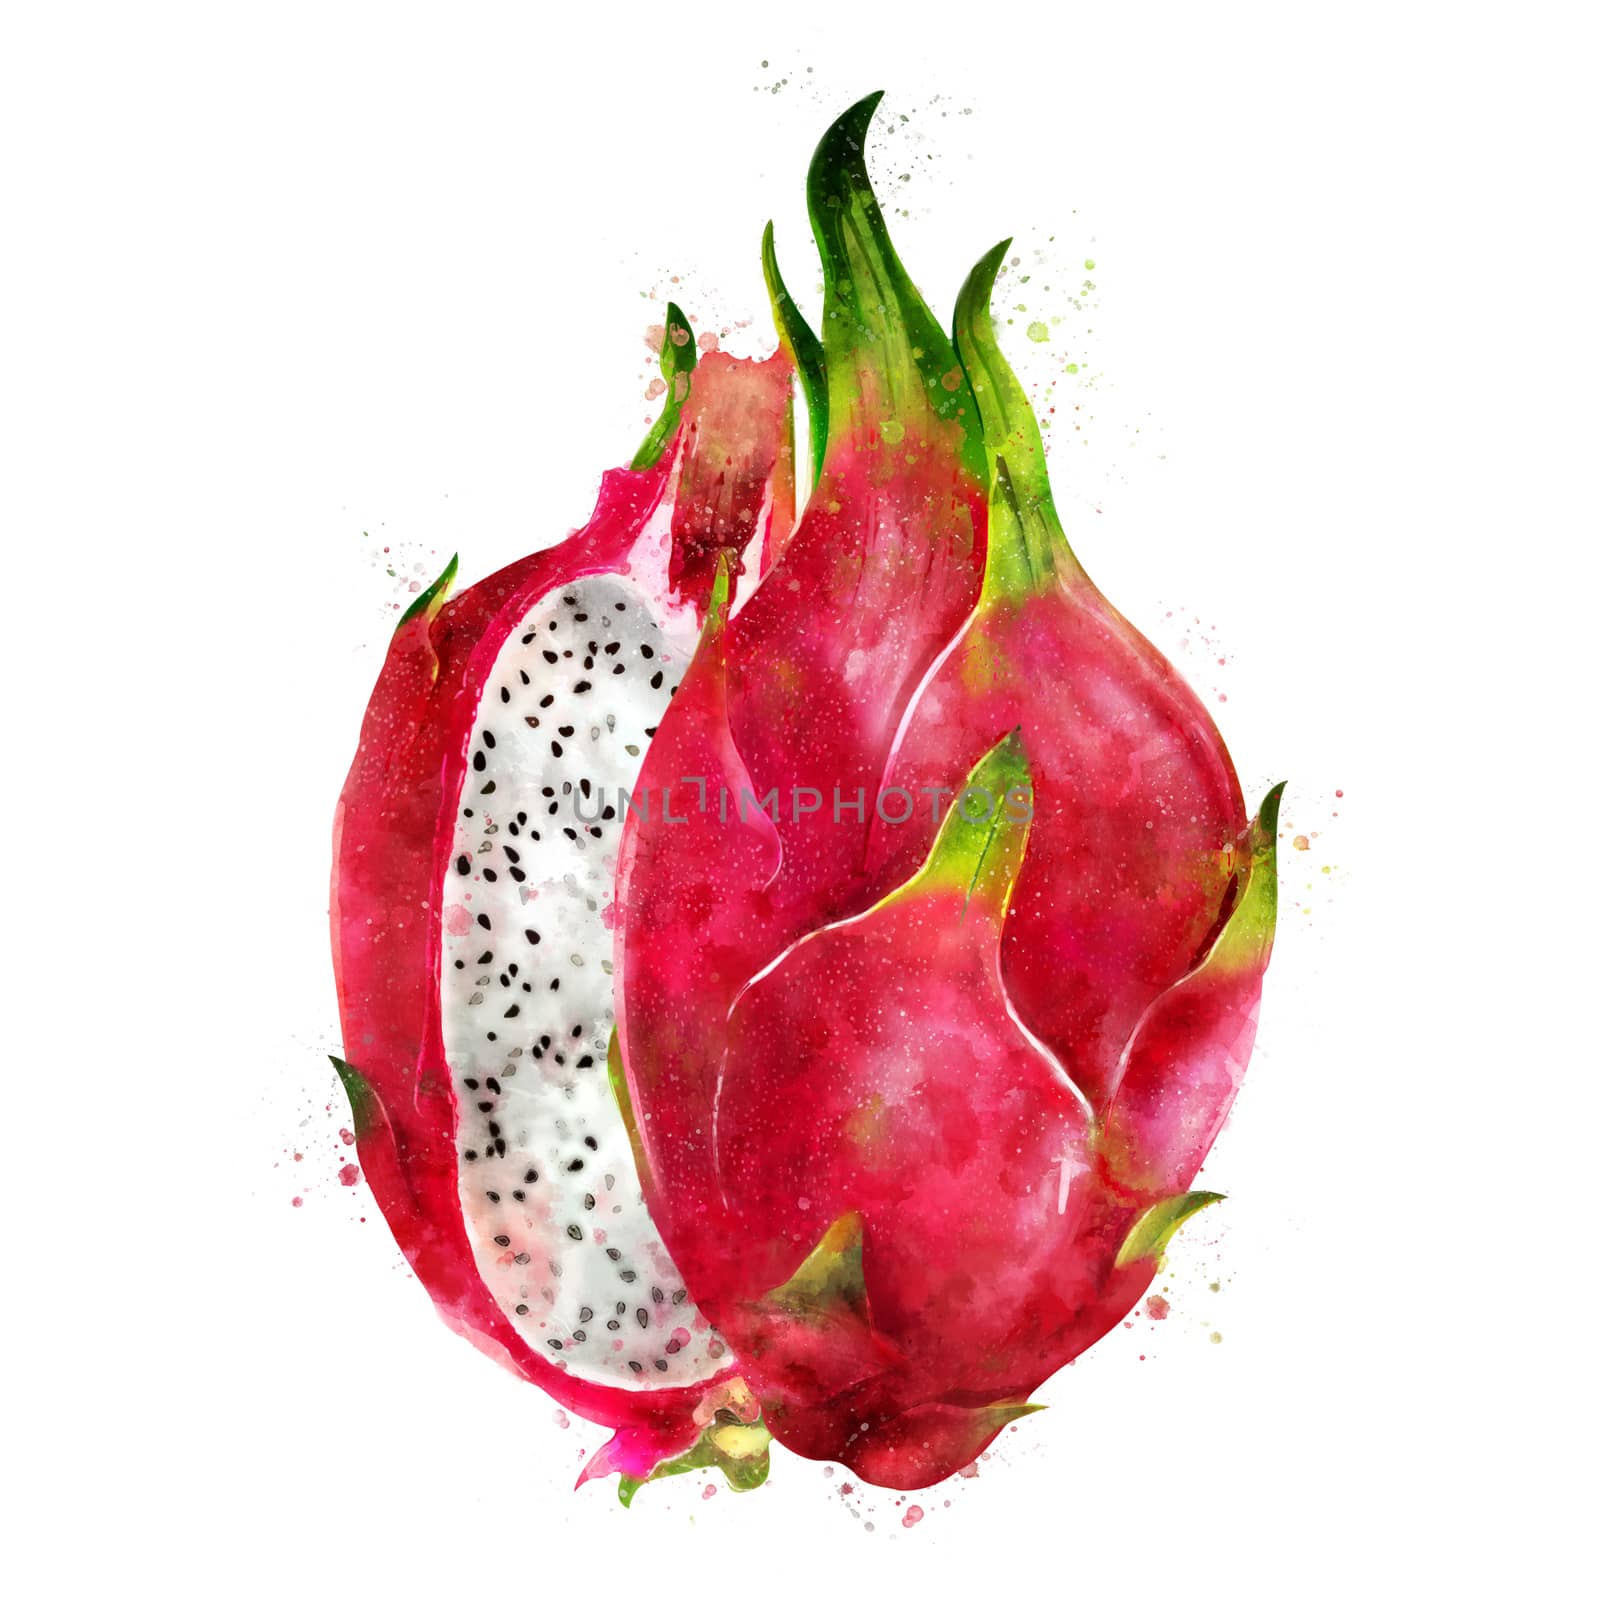 Dragon Fruit on white background. Watercolor illustration by ConceptCafe